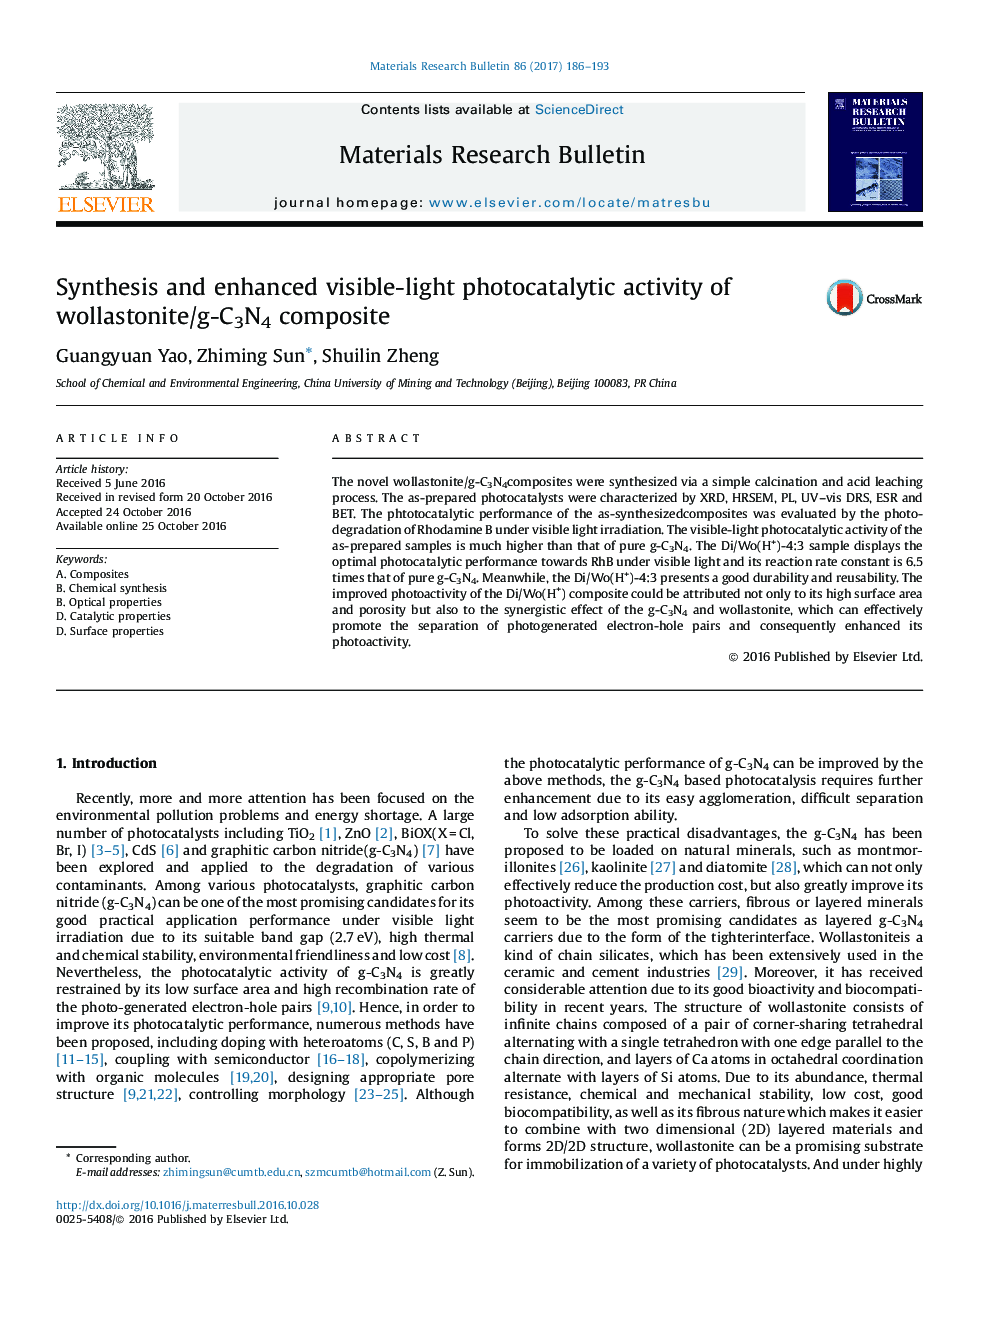 Synthesis and enhanced visible-light photocatalytic activity of wollastonite/g-C3N4 composite